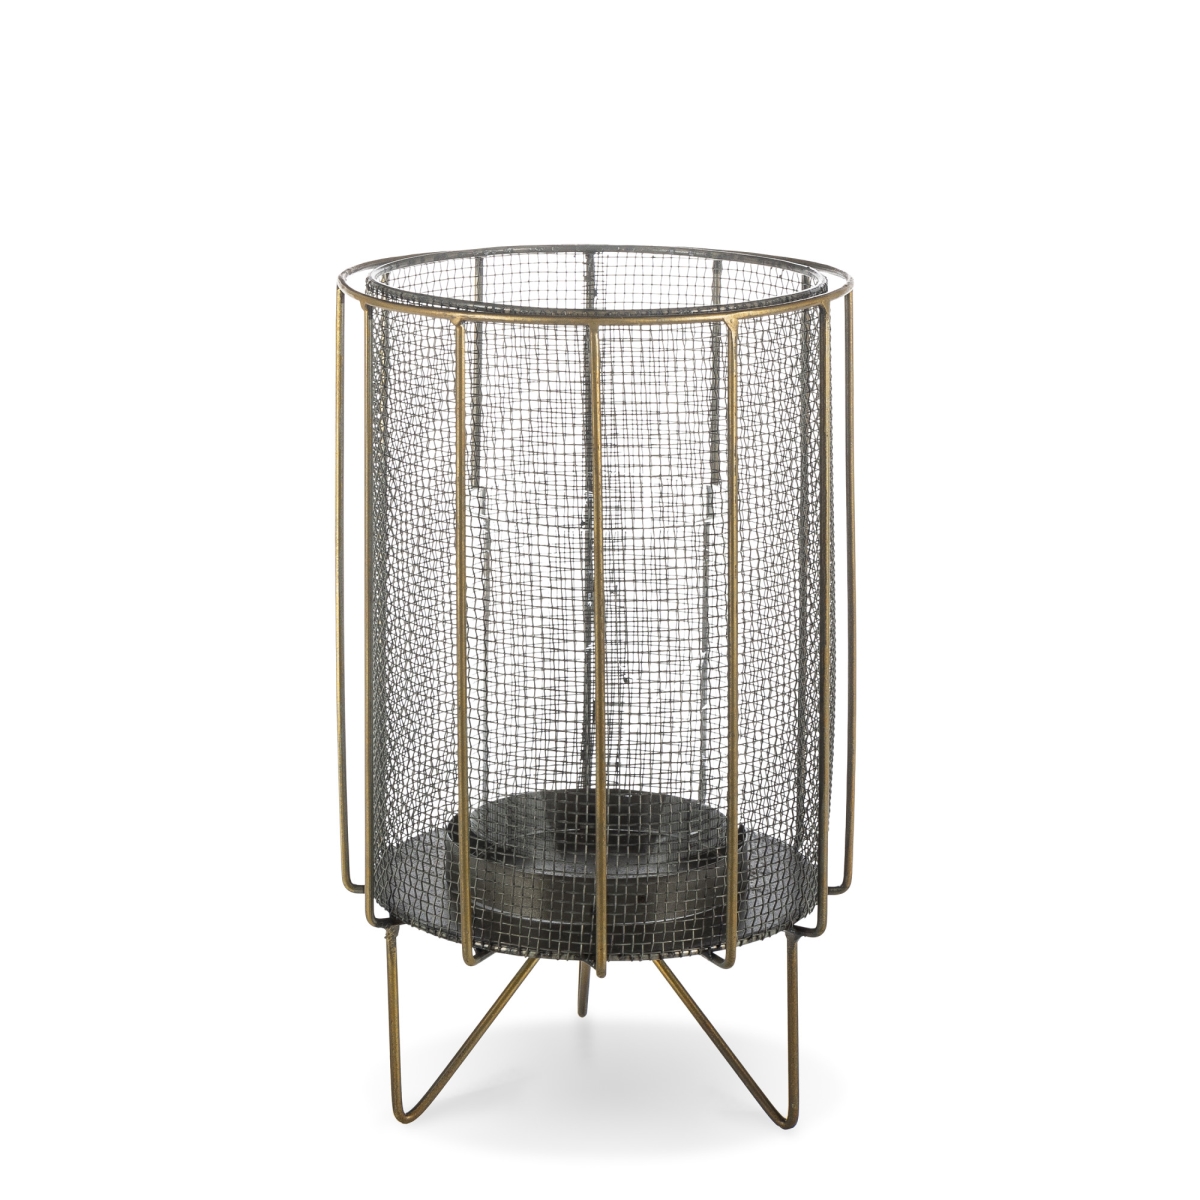 Gerson 44670ec 12 In. Black Mesh Metal Candle Holder With Antique Gold Legs & Accents